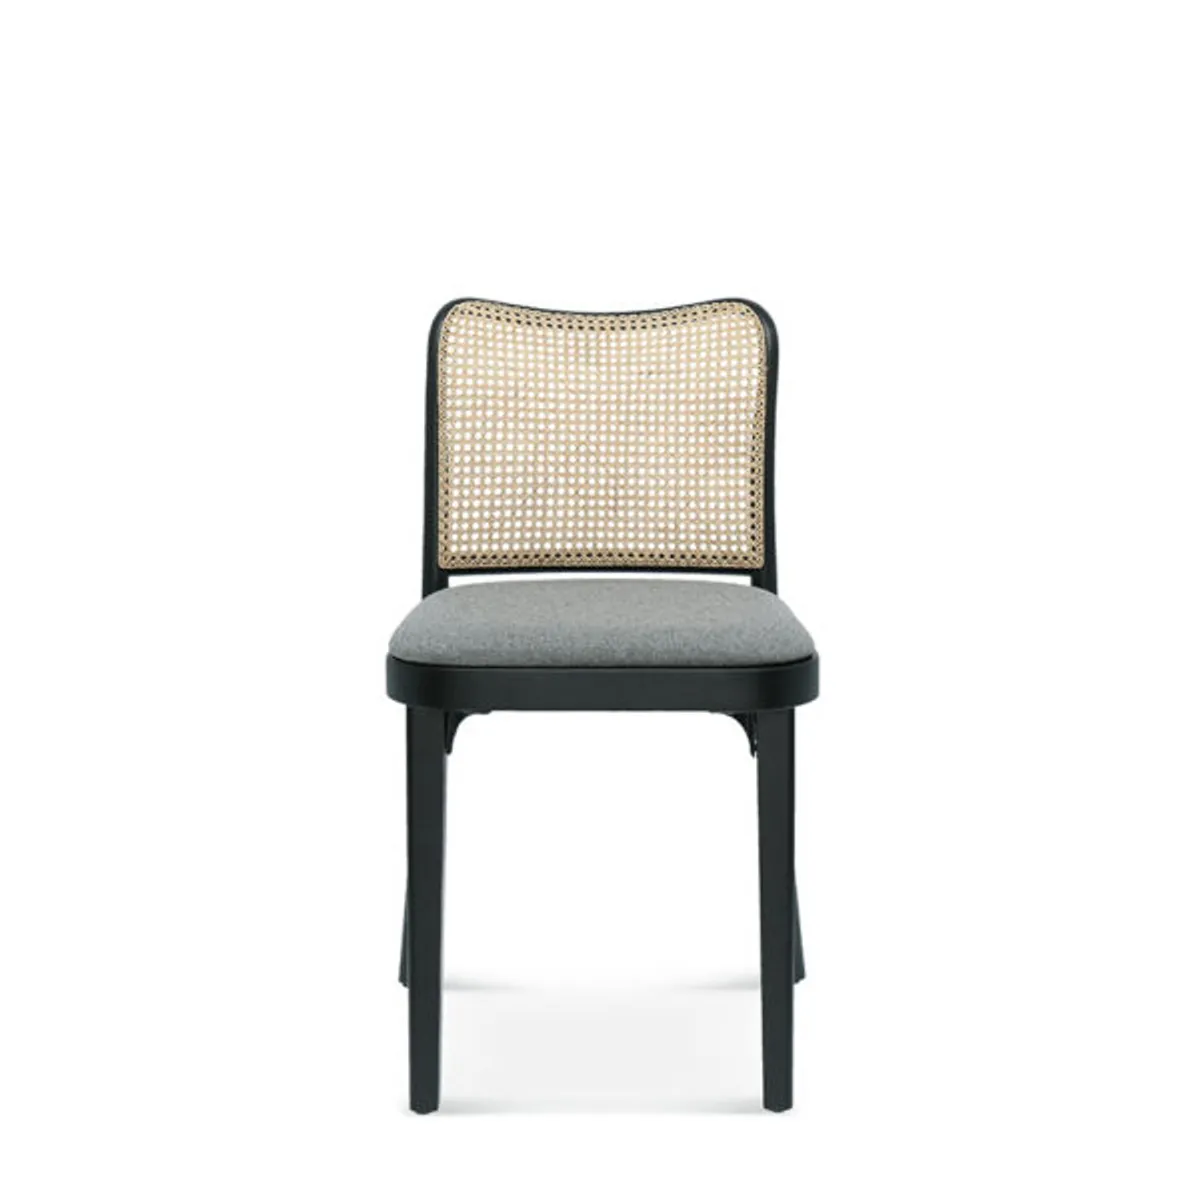 Wentworth Soft Side Chair 0698 Inside Out Contracts